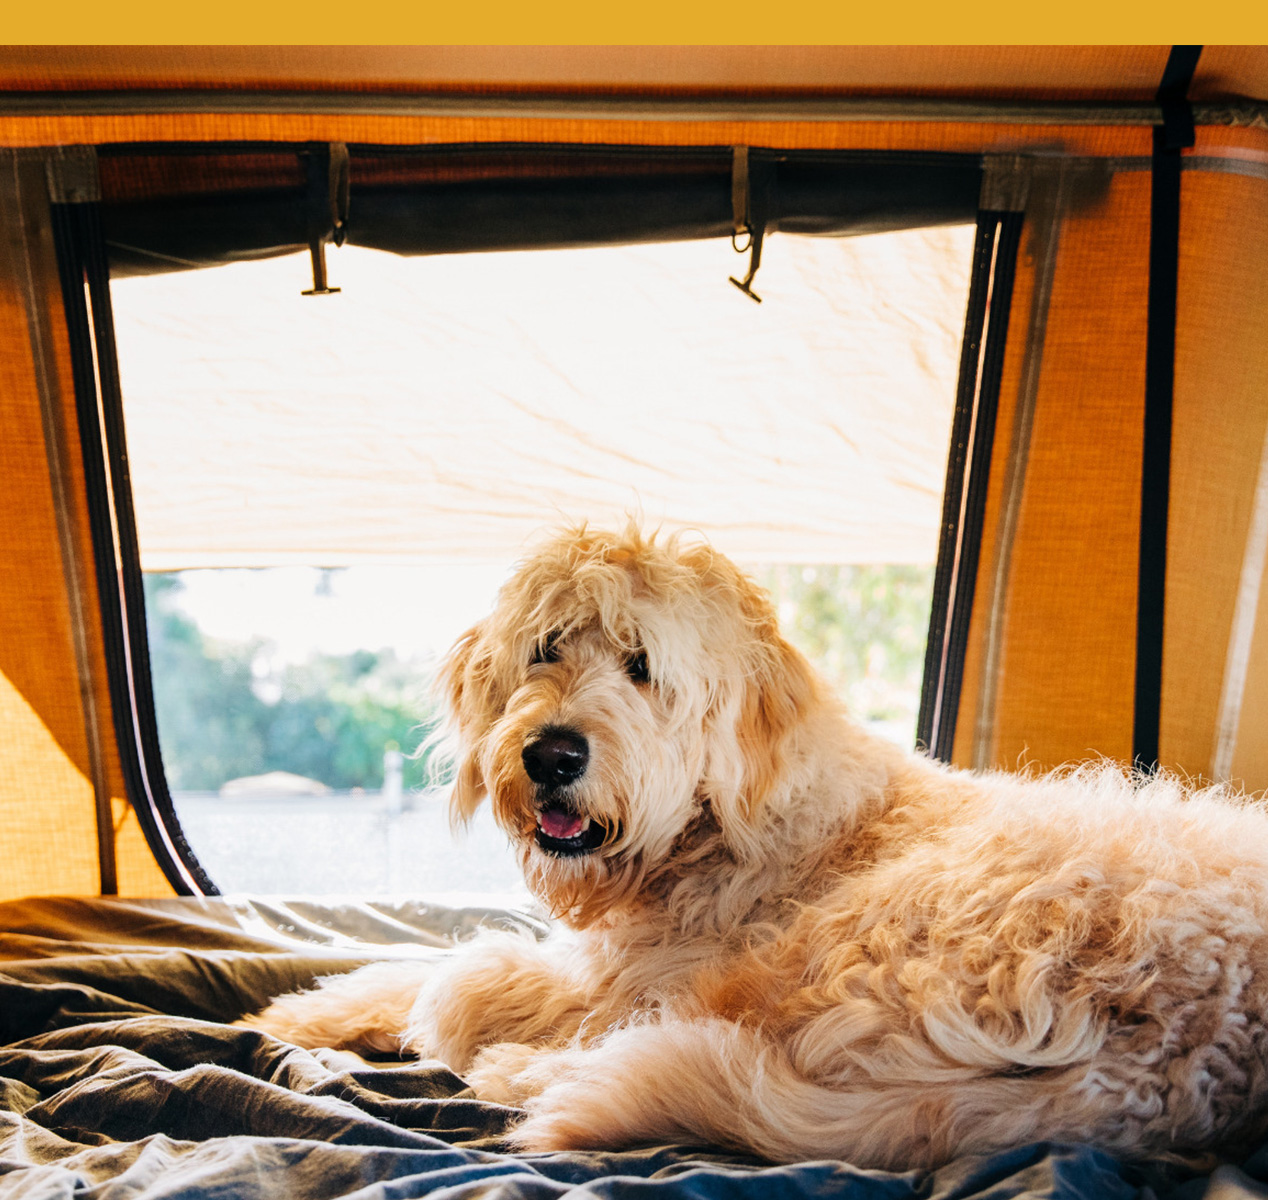 A dog led down inside a camping tent.